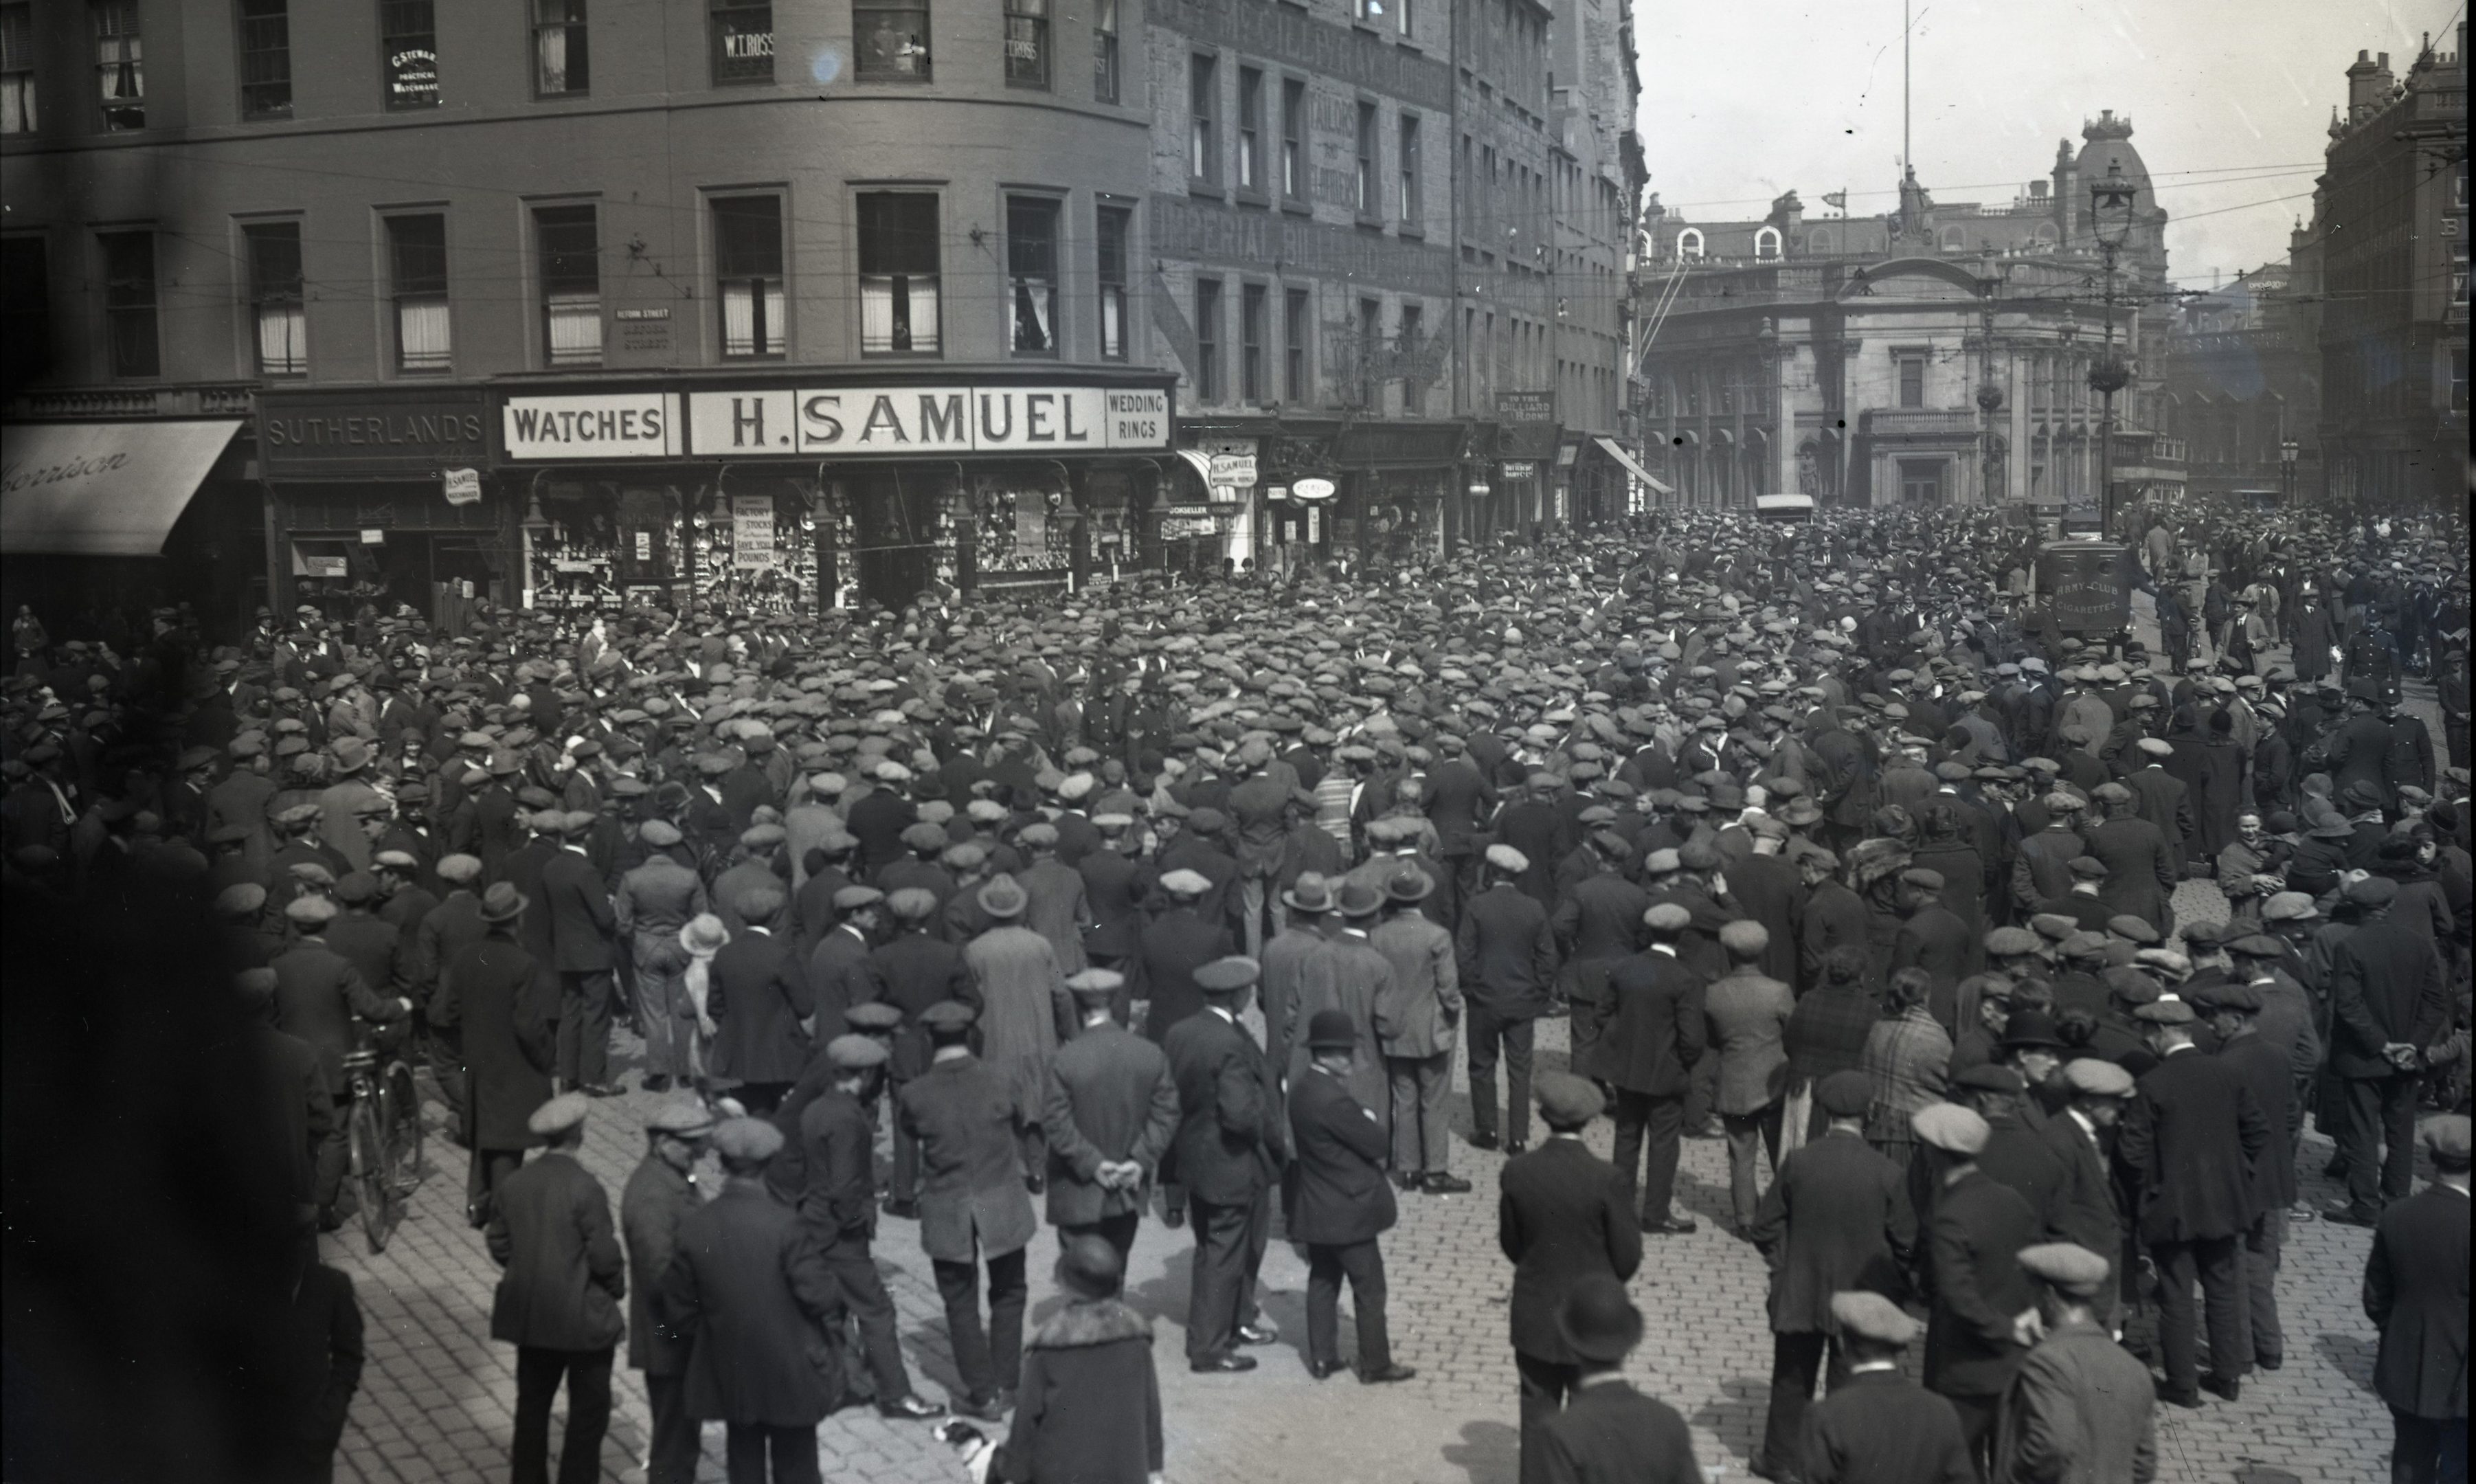 Workers mass in Dundee city centre during the General Strike of 1926